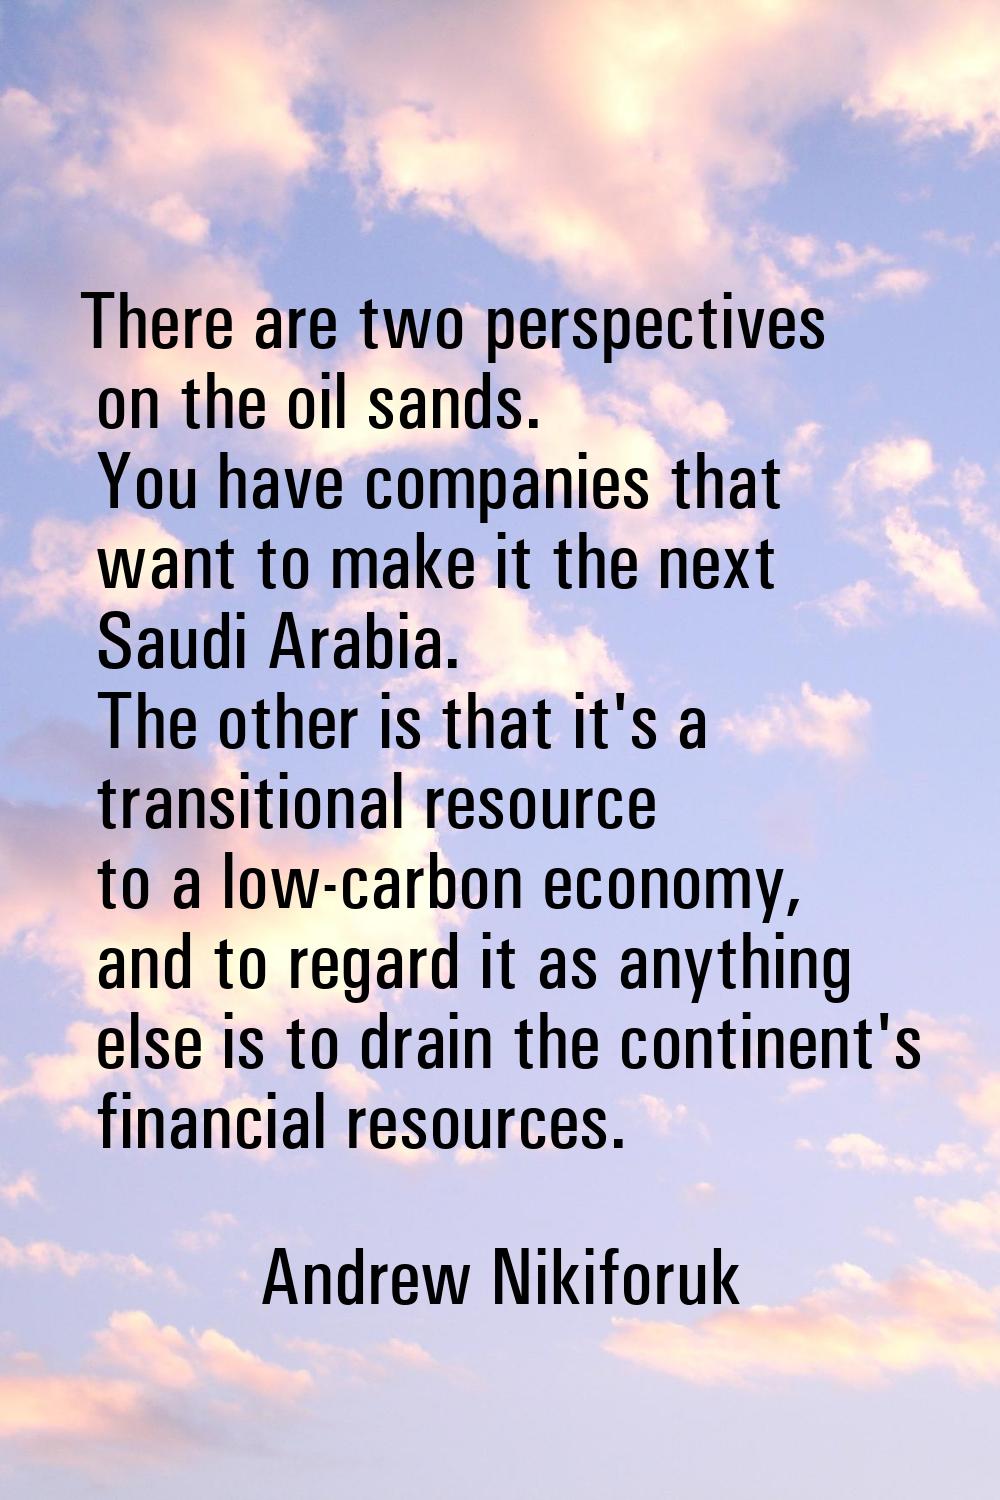 There are two perspectives on the oil sands. You have companies that want to make it the next Saudi